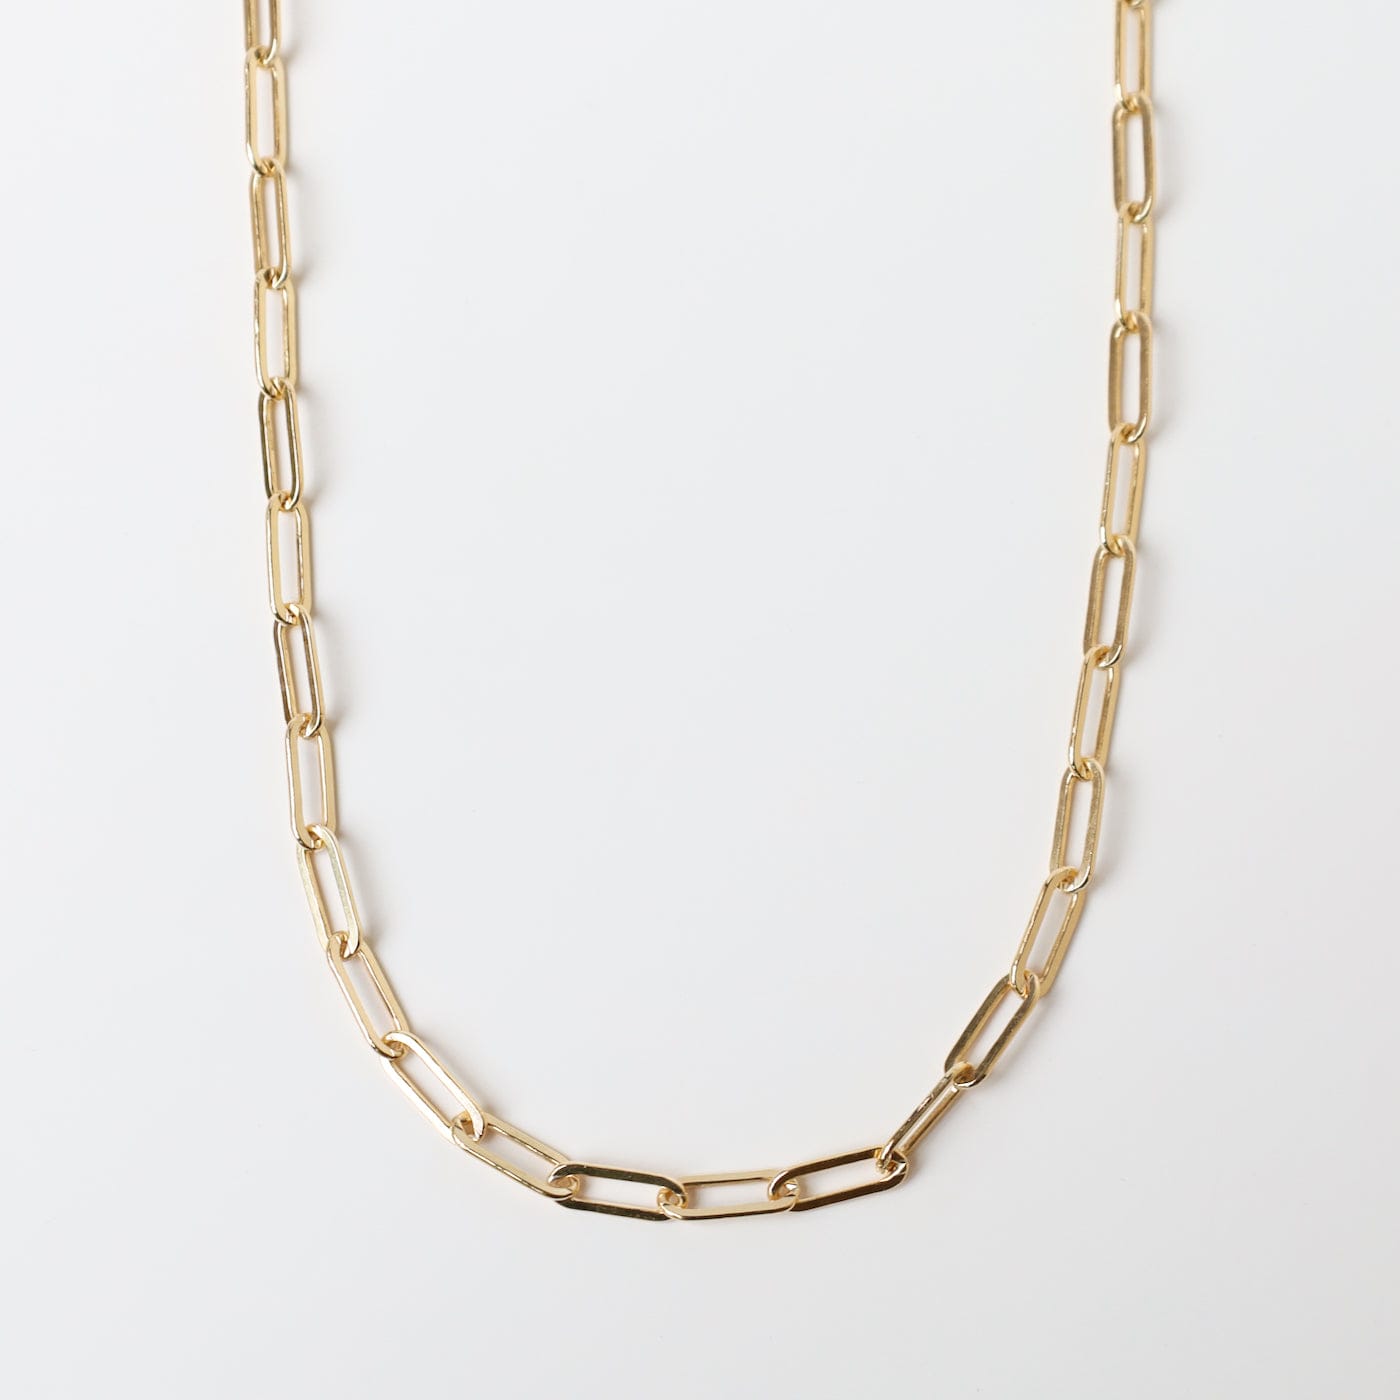 NKL-GF 18" Gold Filled Flat Drawn Cable Chain